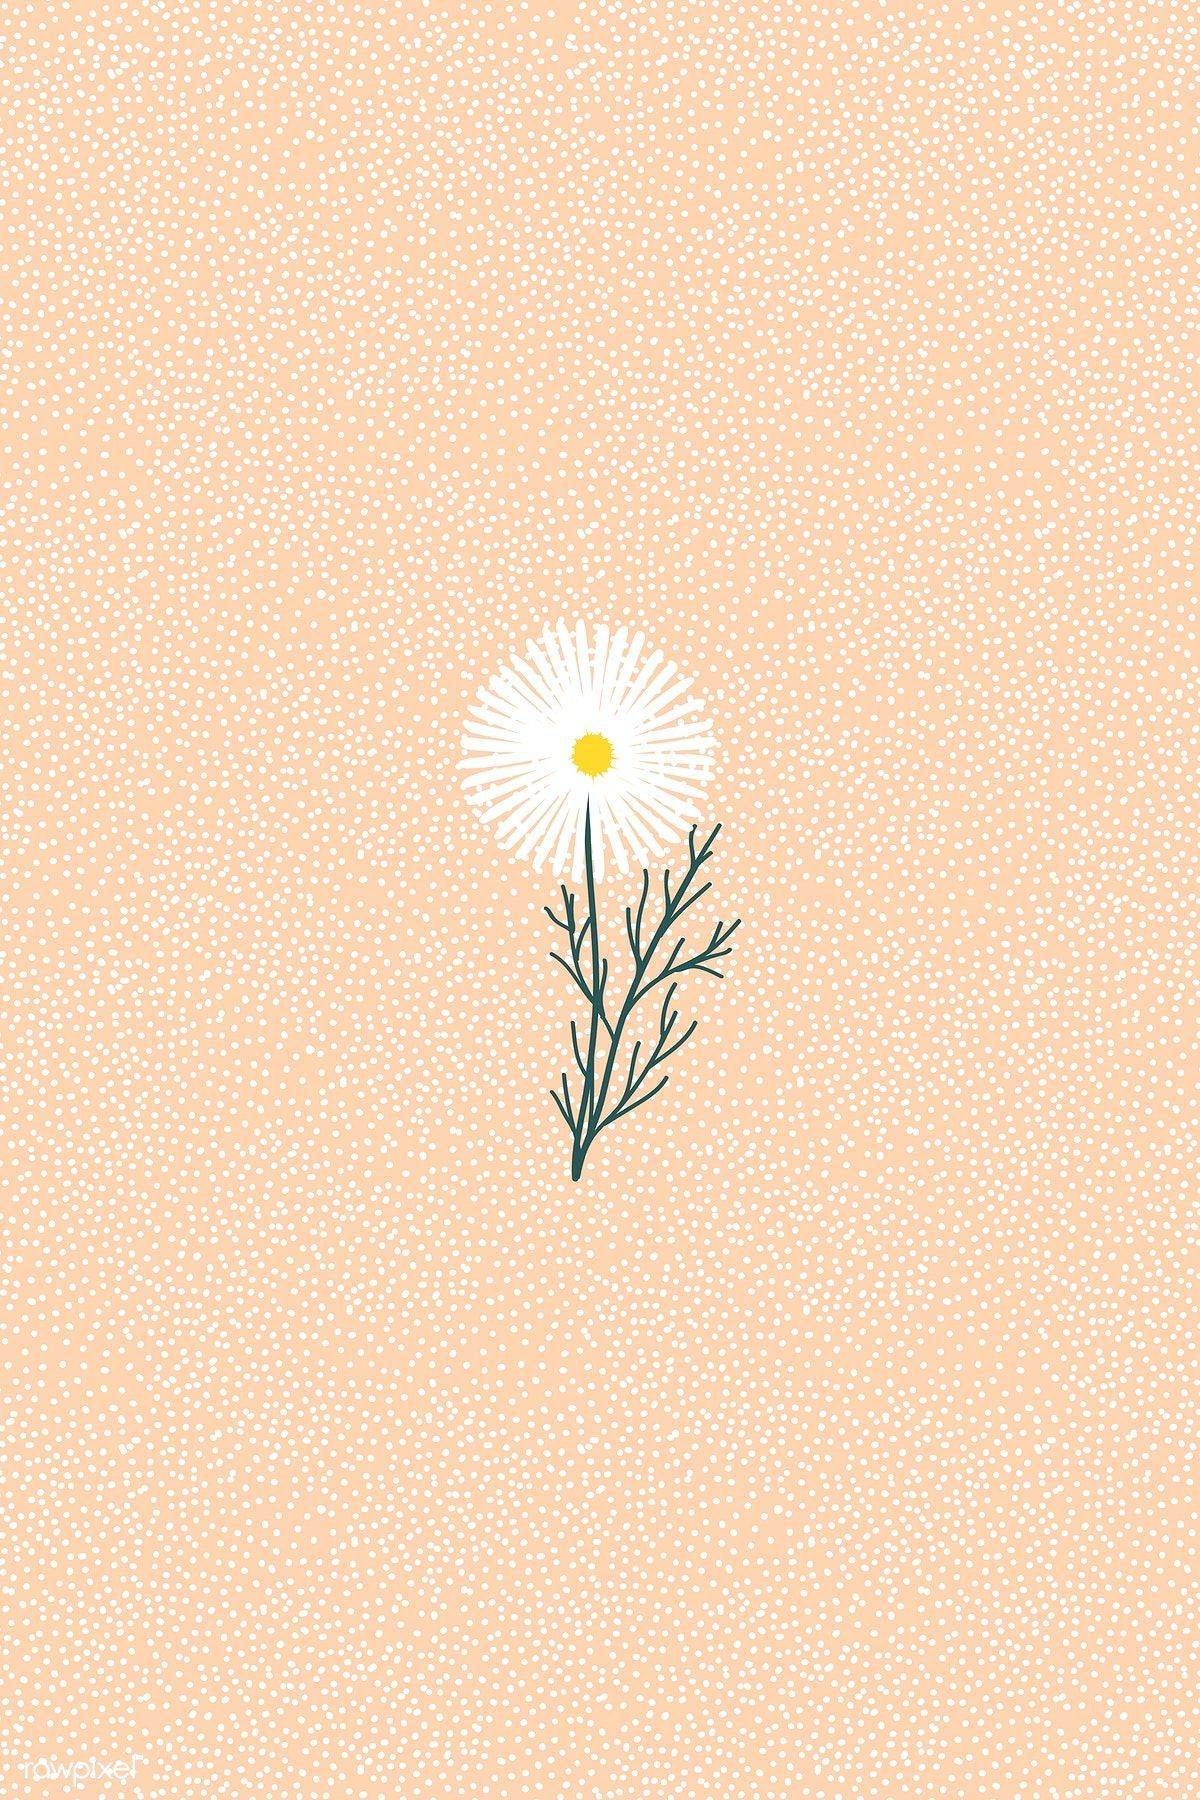 Download premium vector of White daisy on a peach polka dot background - Dandelions